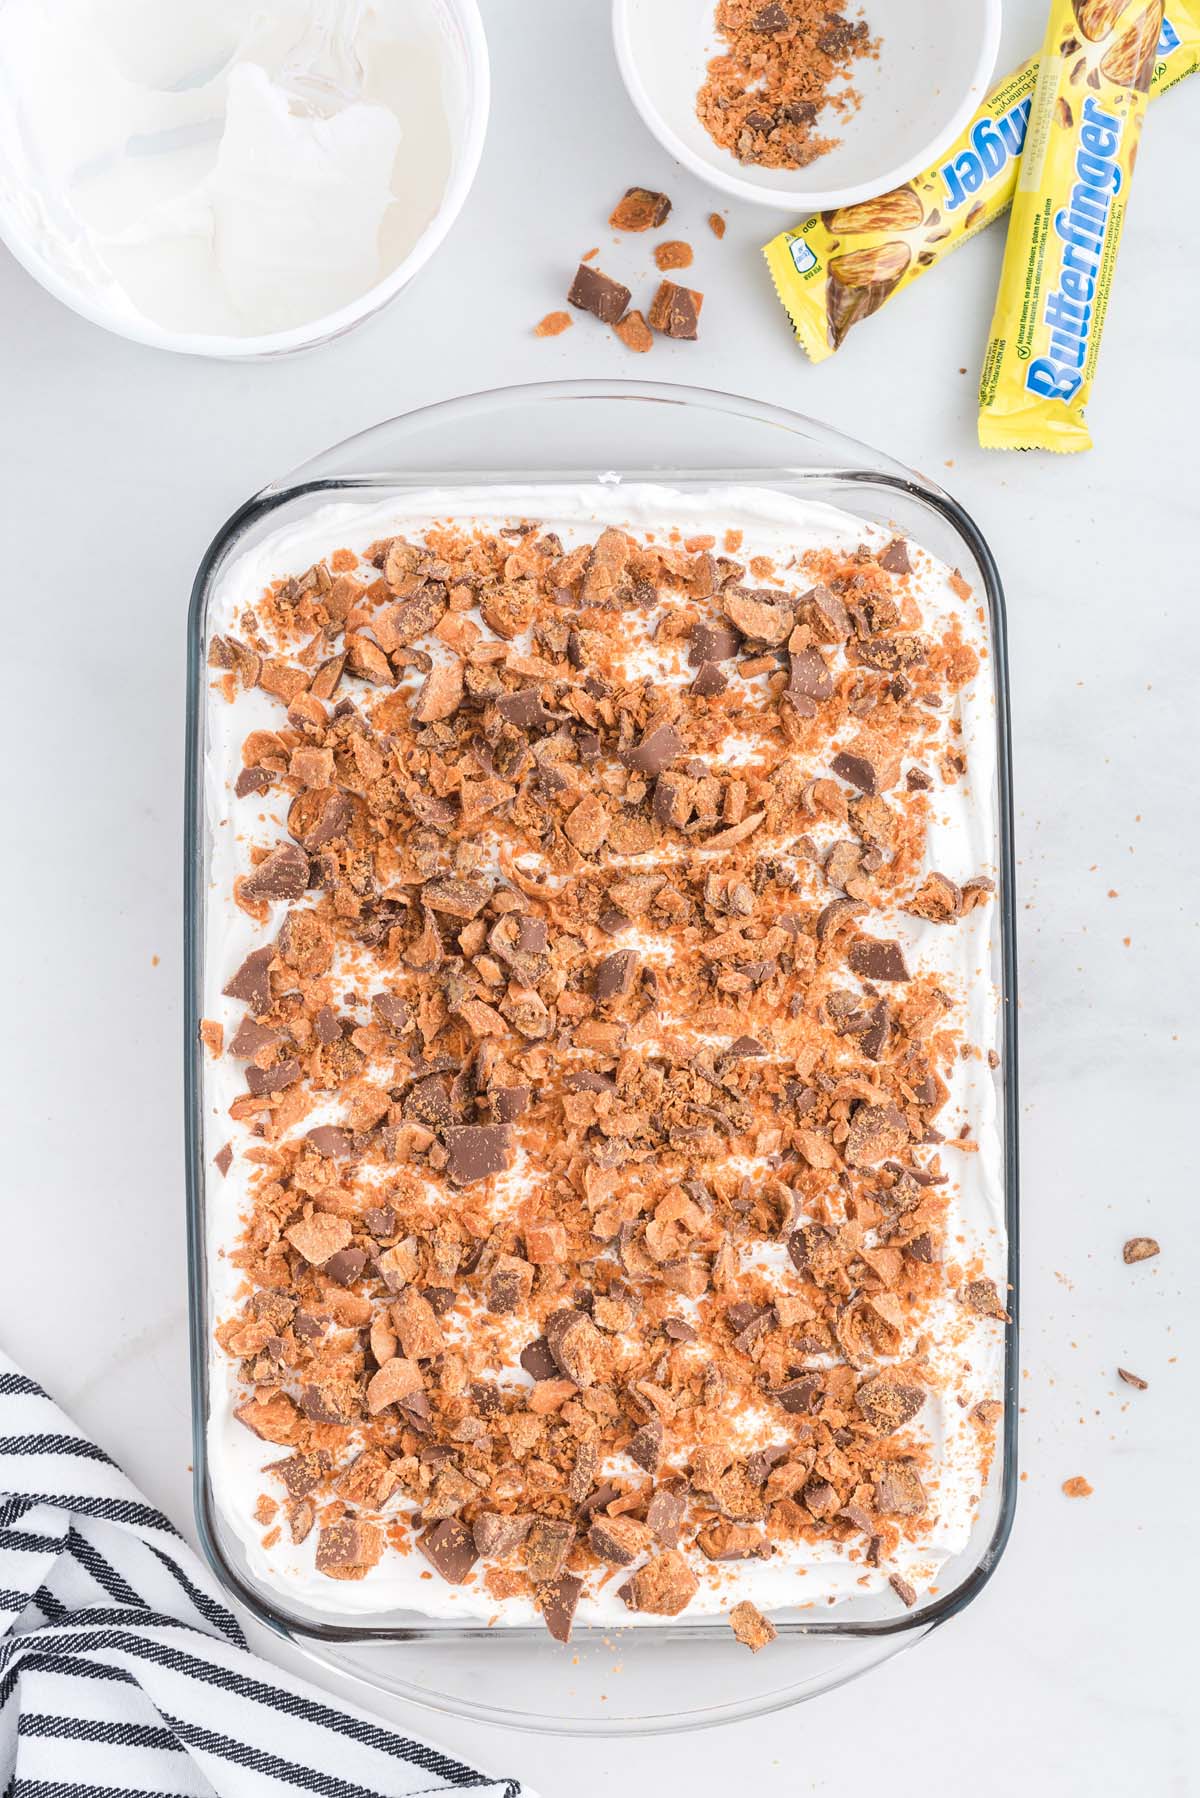 sprinkle candy bars on top